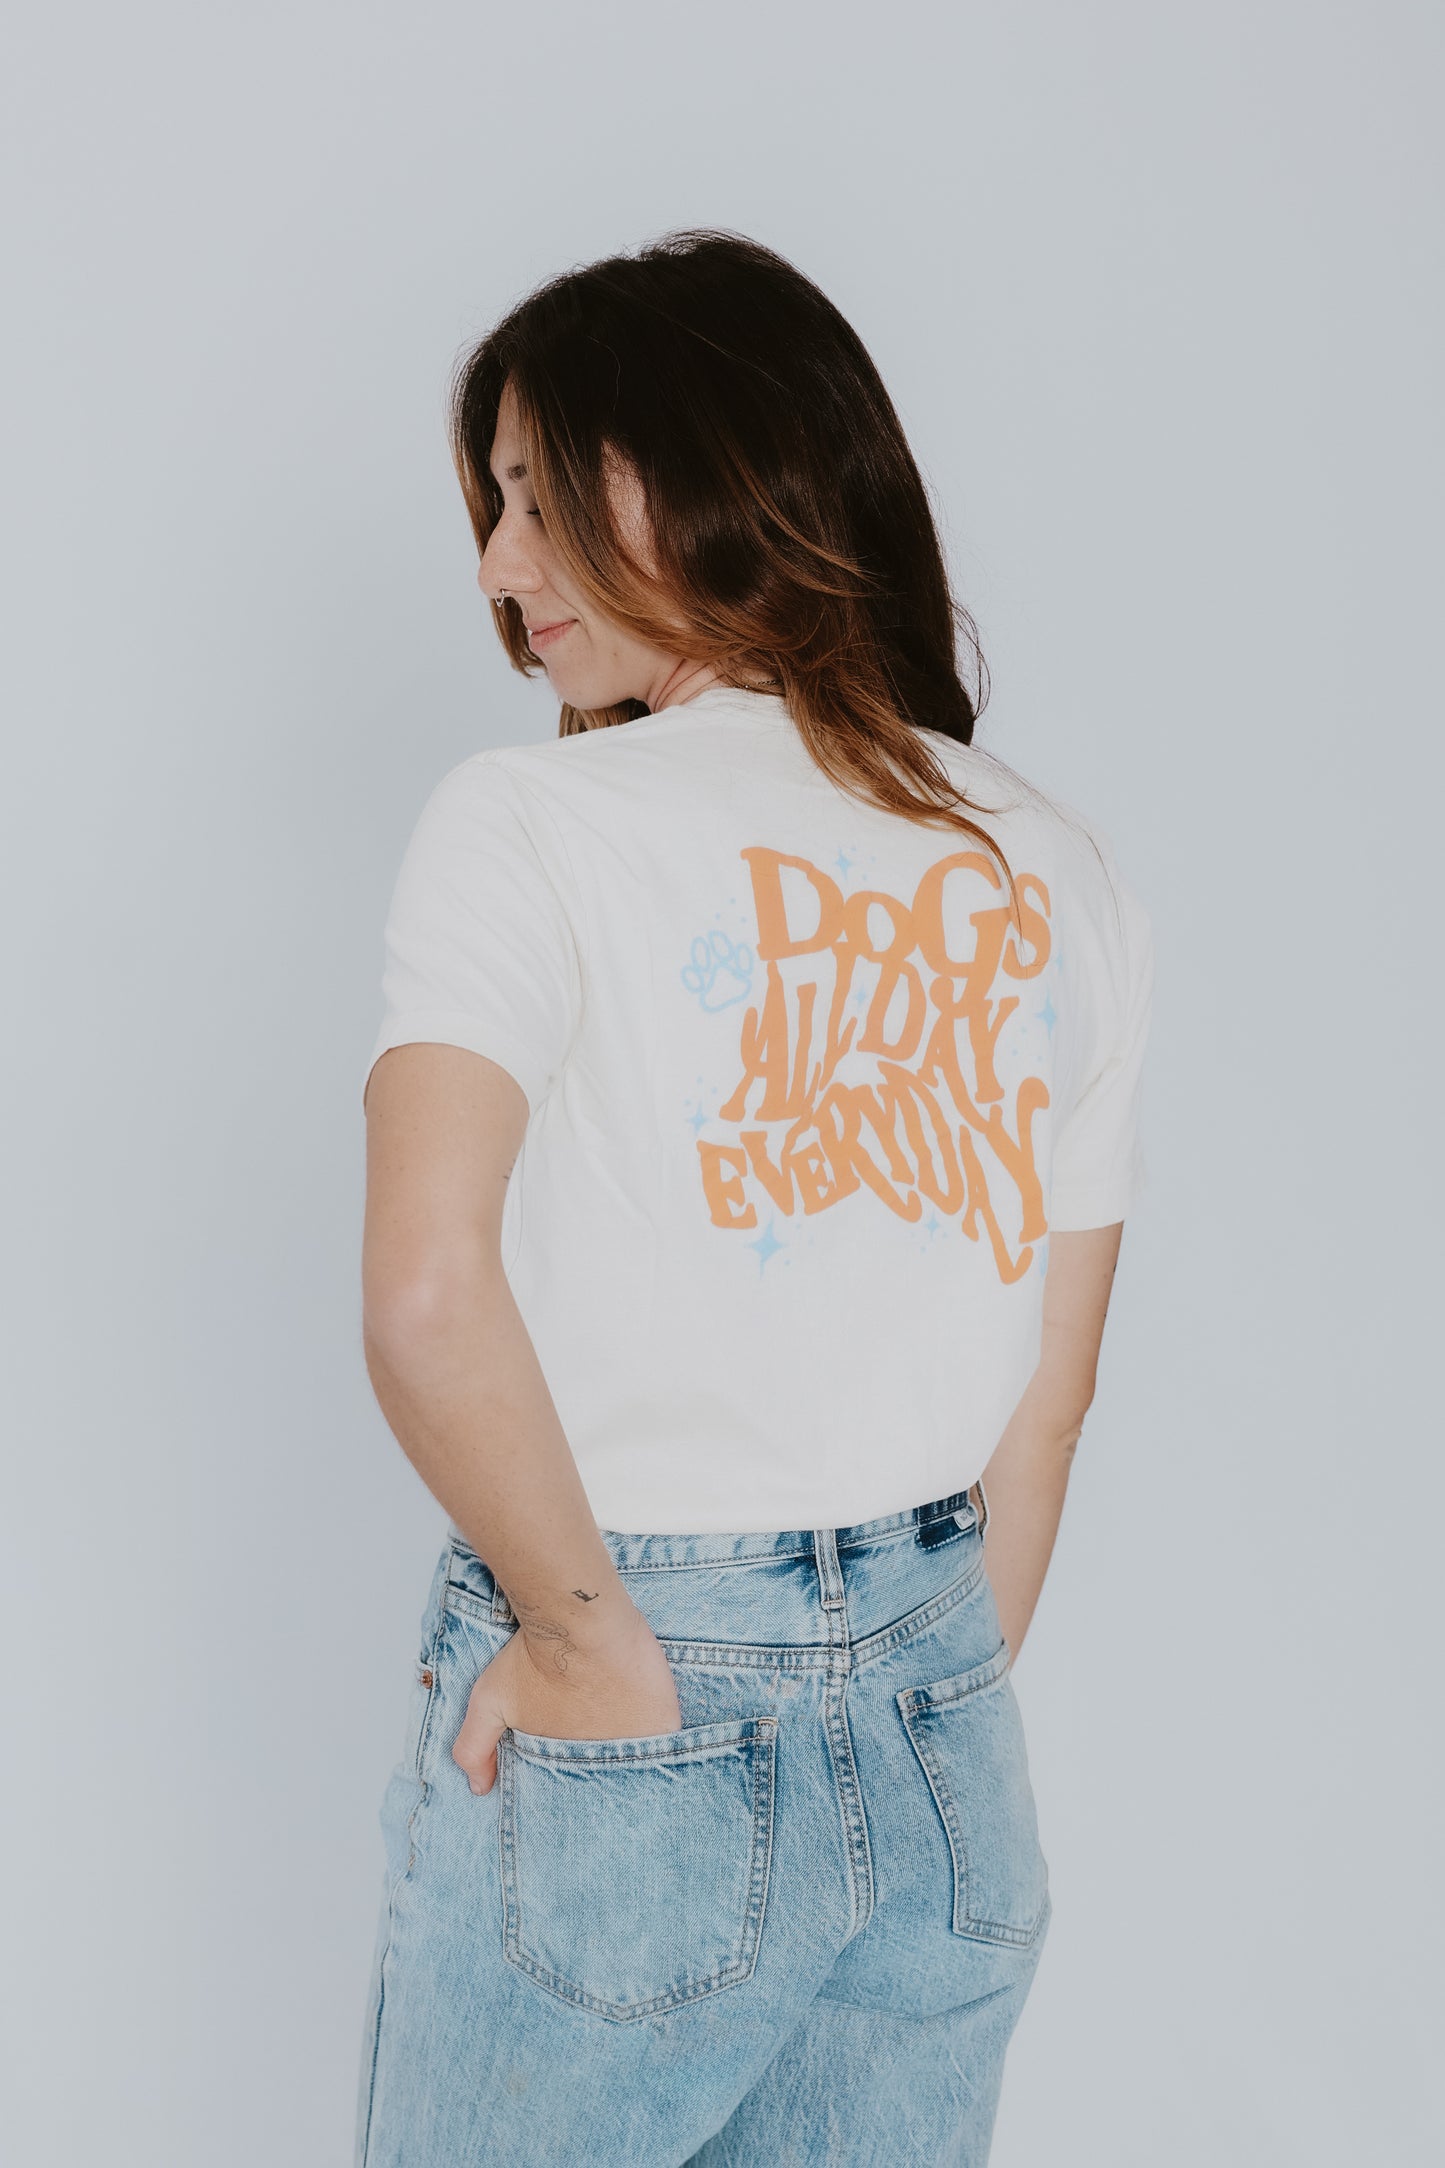 "Dogs All Day Everyday" Tee